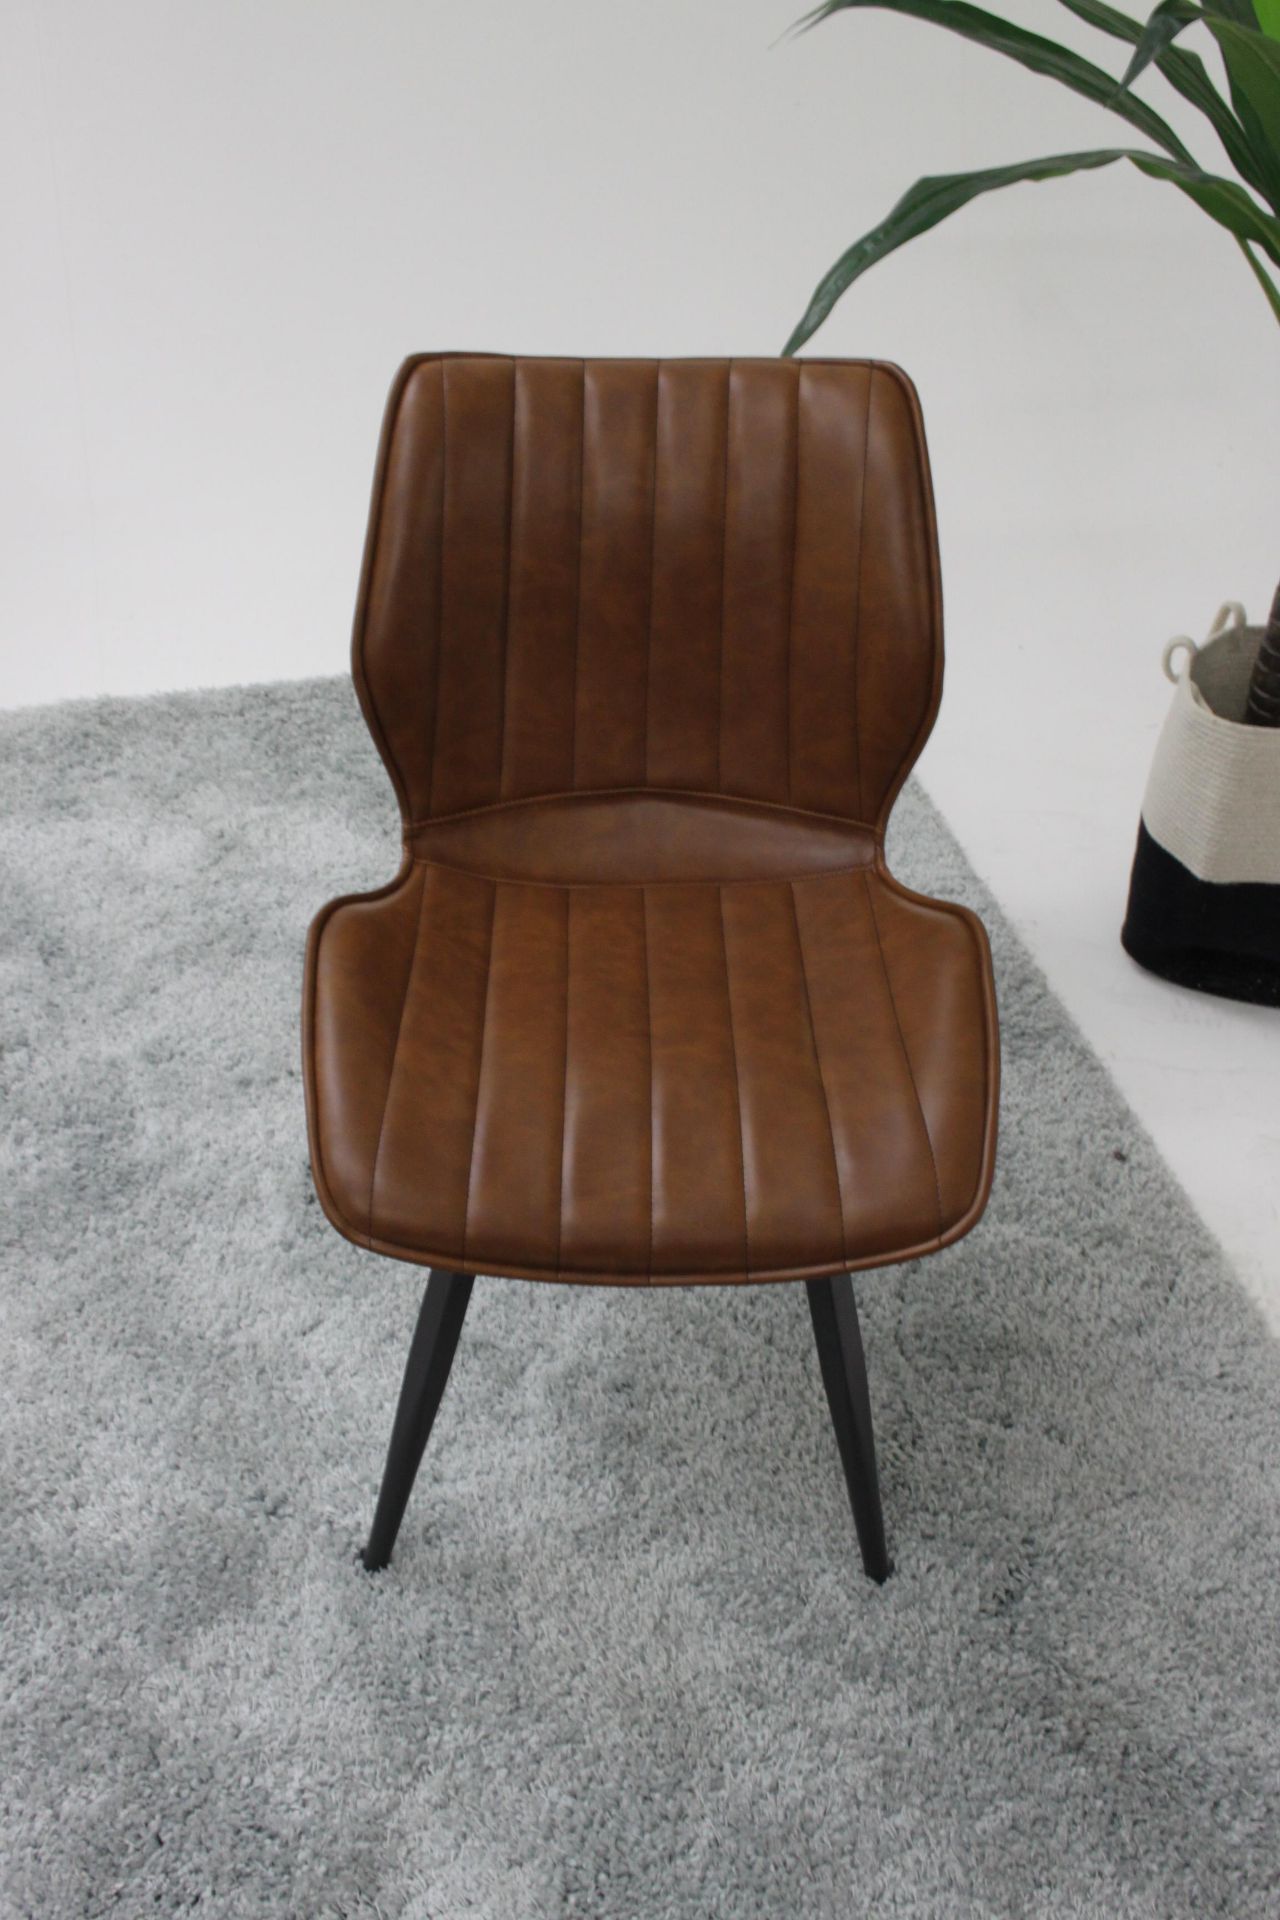 Alfa Ribbed Dining Chair Vegan Leather Tan Quilted Upholstery - Image 2 of 4